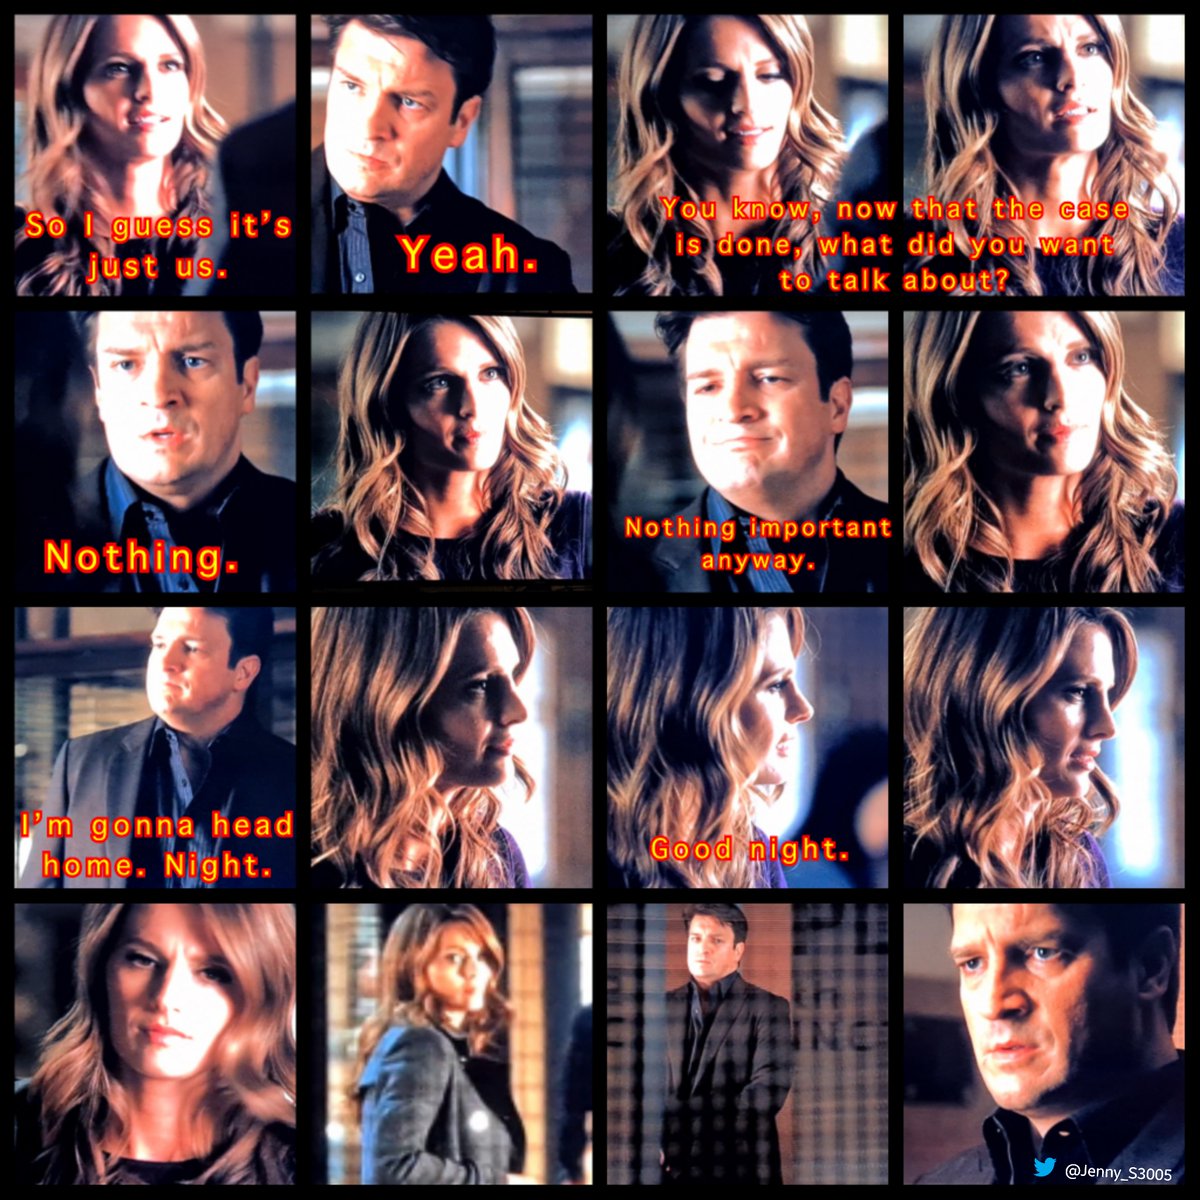 03/26/2012 - #Castle 4x19- 47 Seconds aired ✨12✨ years ago 💥 (III/III) KB: 'You know, now that the case is done... what did you want to talk about?' C: 'Nothing. Nothing important anyway. I'm gonna head home. Good night.' KB: 'Good night.'